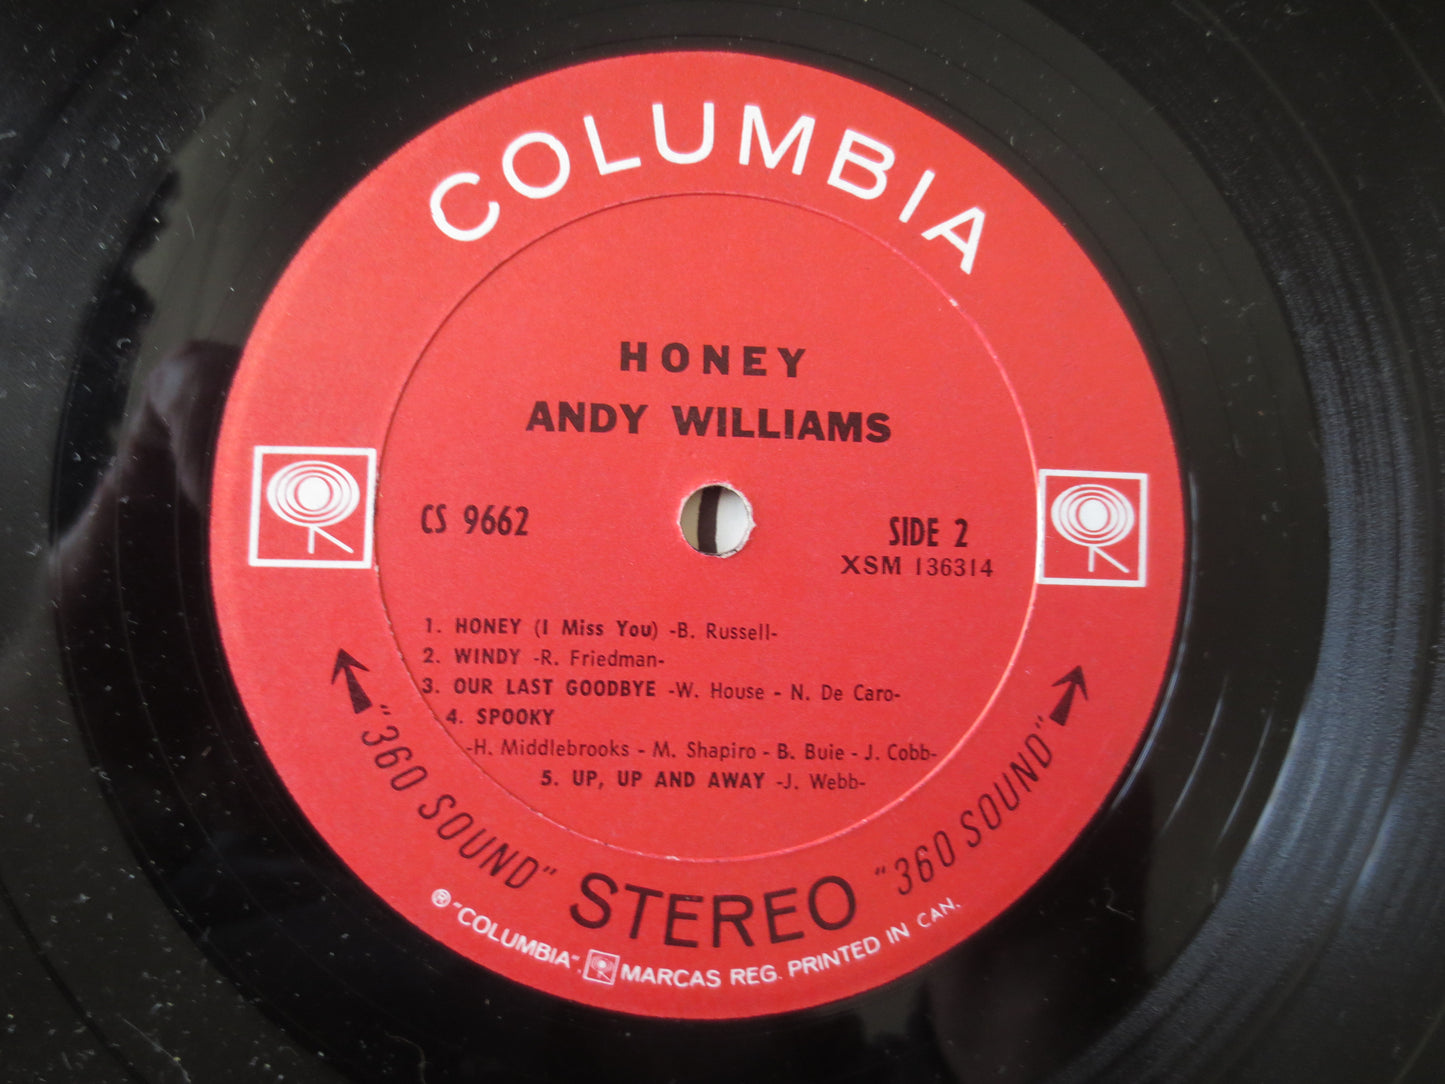 ANDY WILLIAMS, HONEY, Andy Williams Albums, Andy Williams Vinyl, Vintage Vinyl, Jazz Albums, Vinyl Lps, Lps, 1968 Records